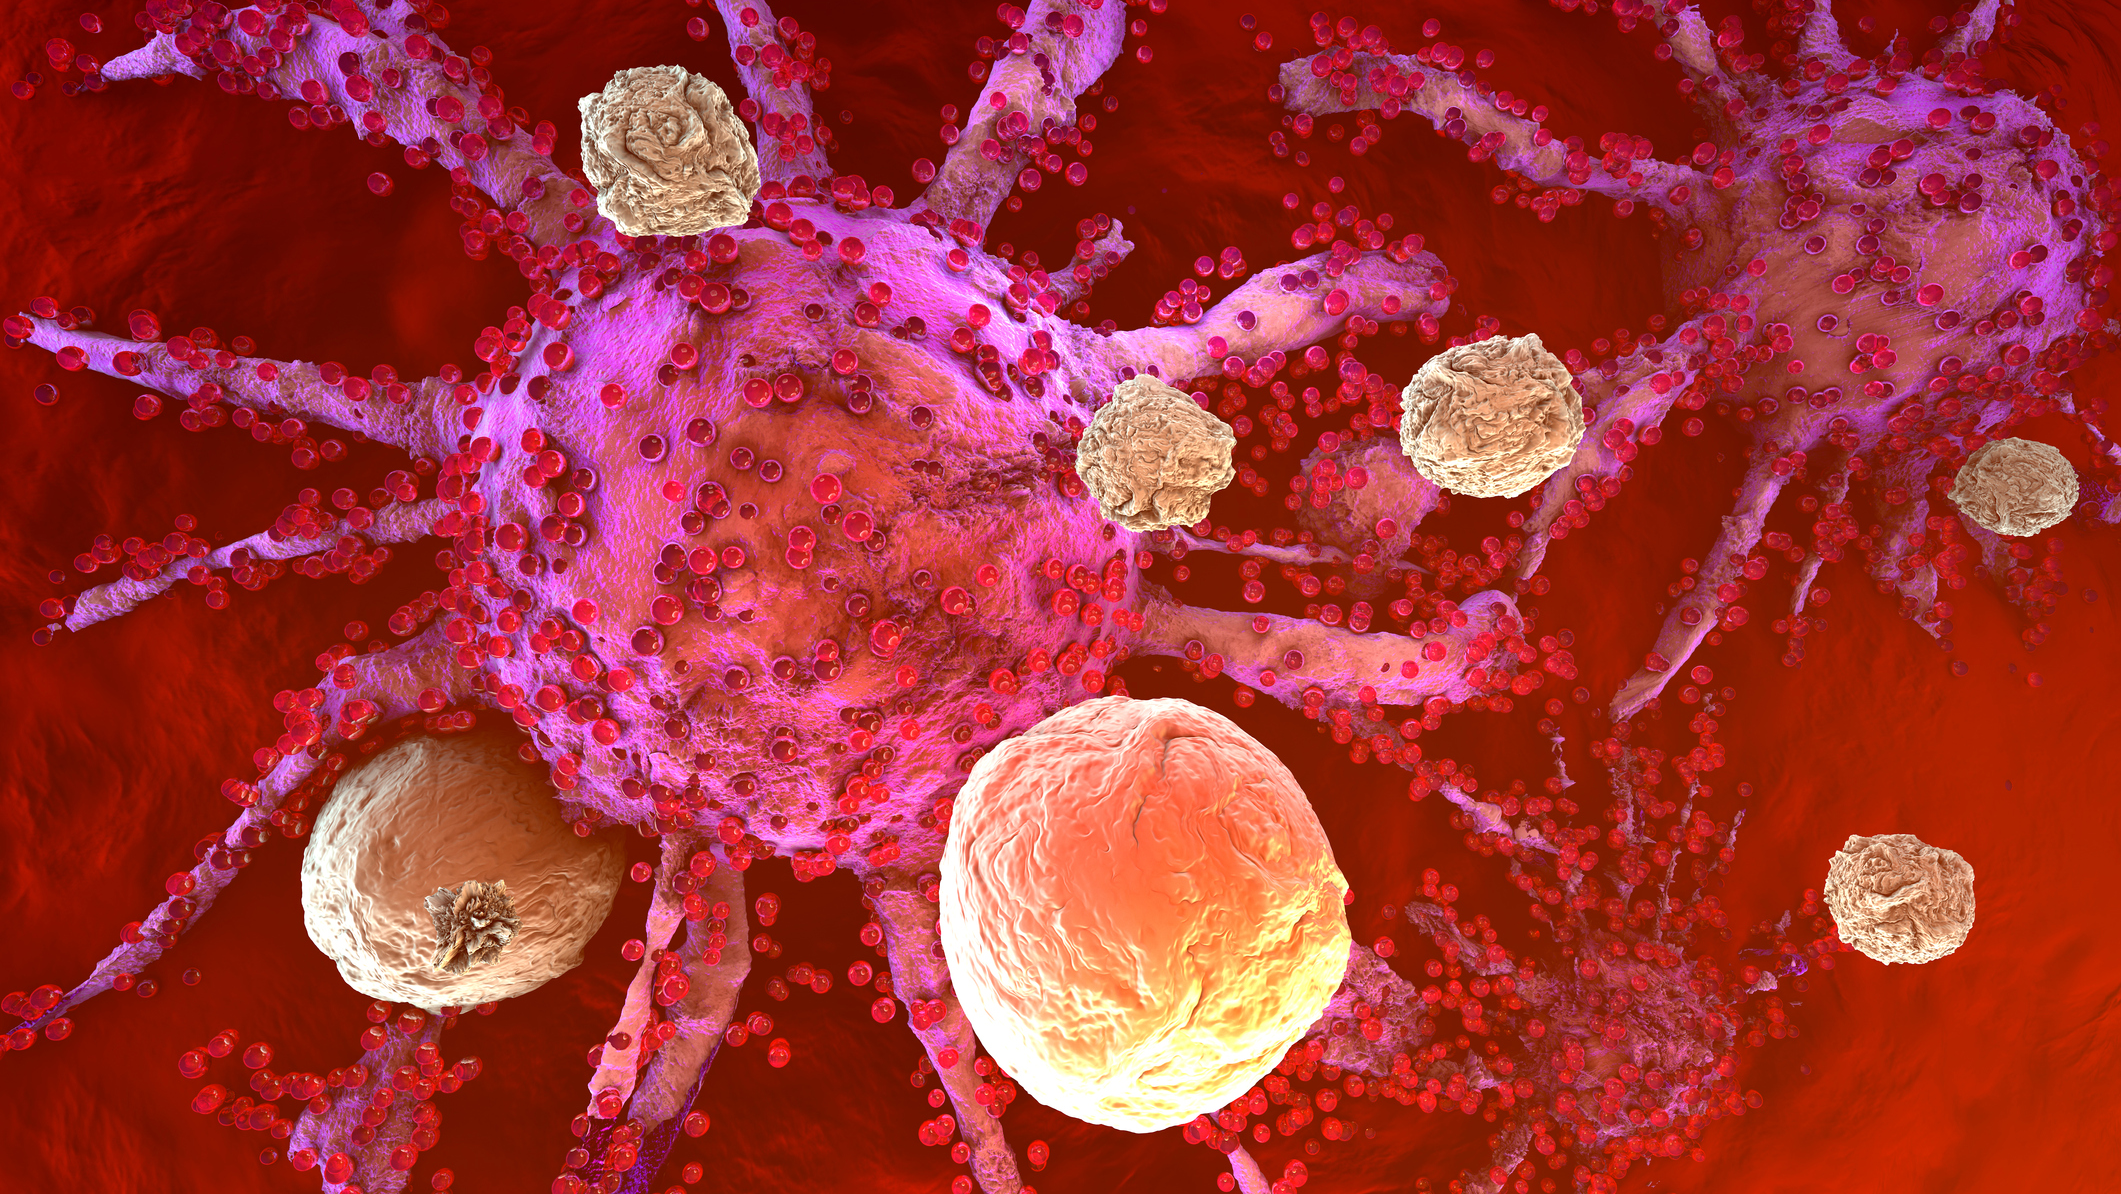 T Cells Attacking Cancer Cells